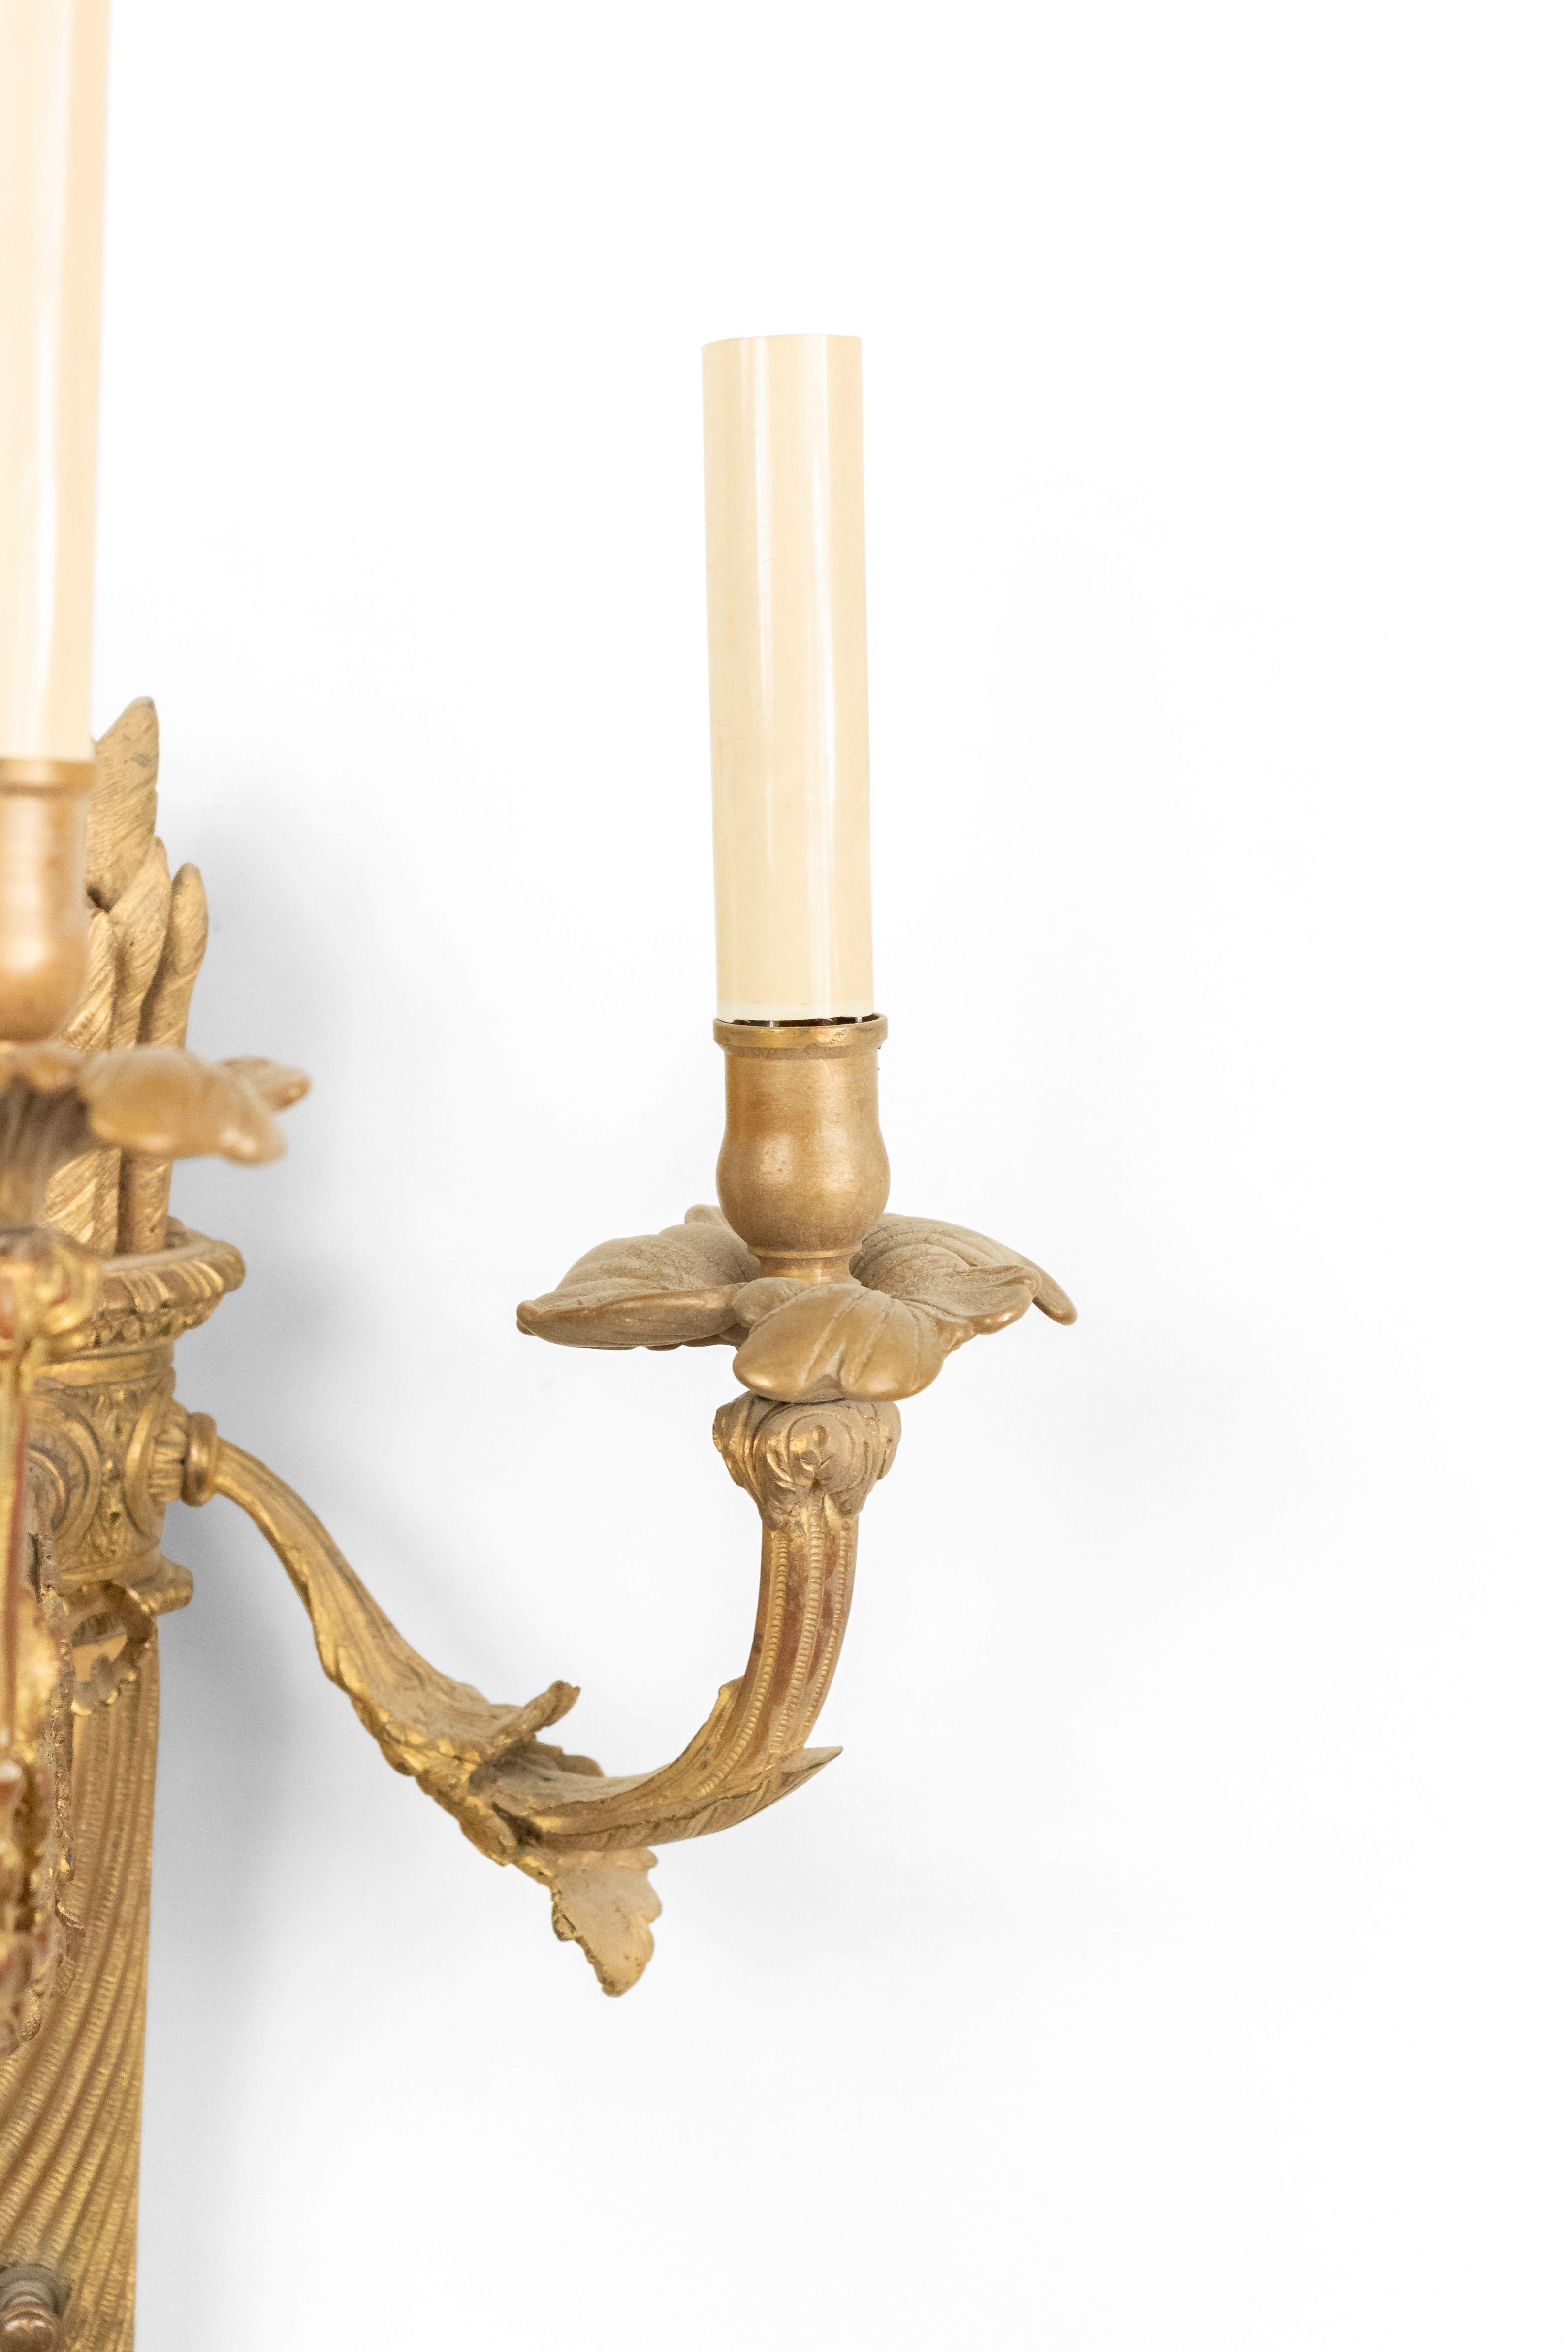 Pair of French Louis XVI-style (19th Century) bronze dore wall sconces with three arms with torch designs and arrow tops. (PRICED AS PAIR).
 